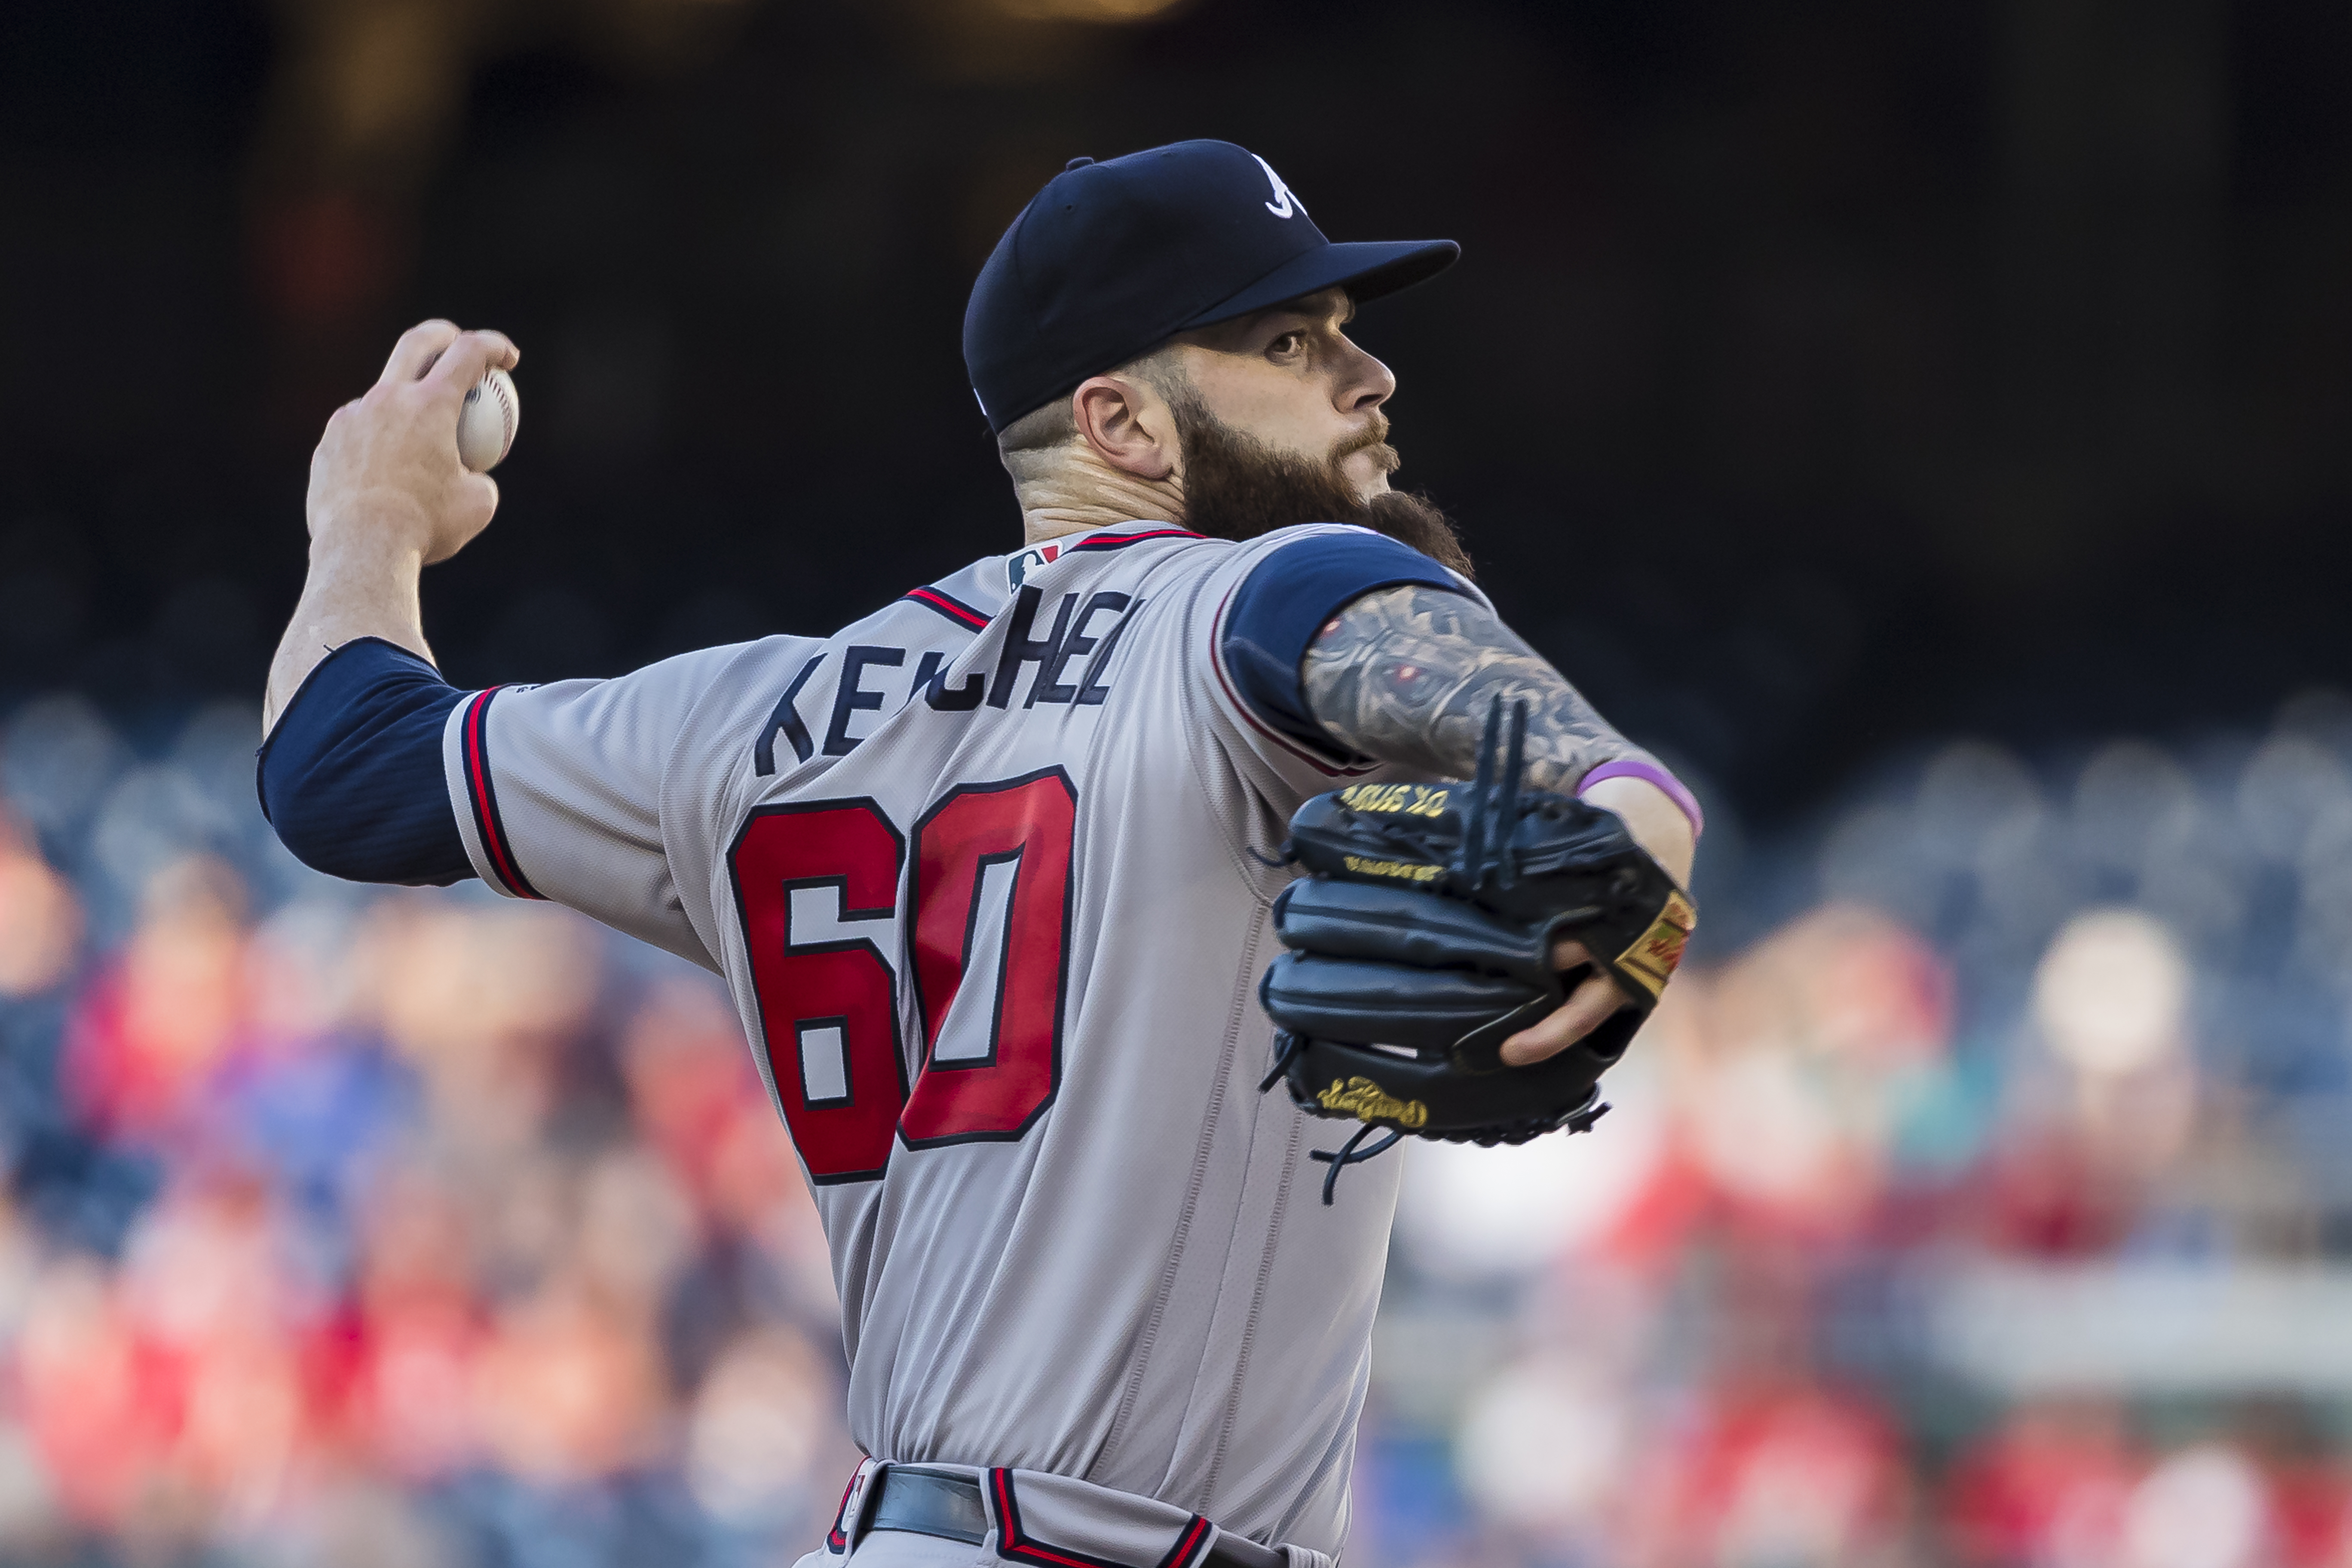 Dallas Keuchel's first outing in the Braves organization was